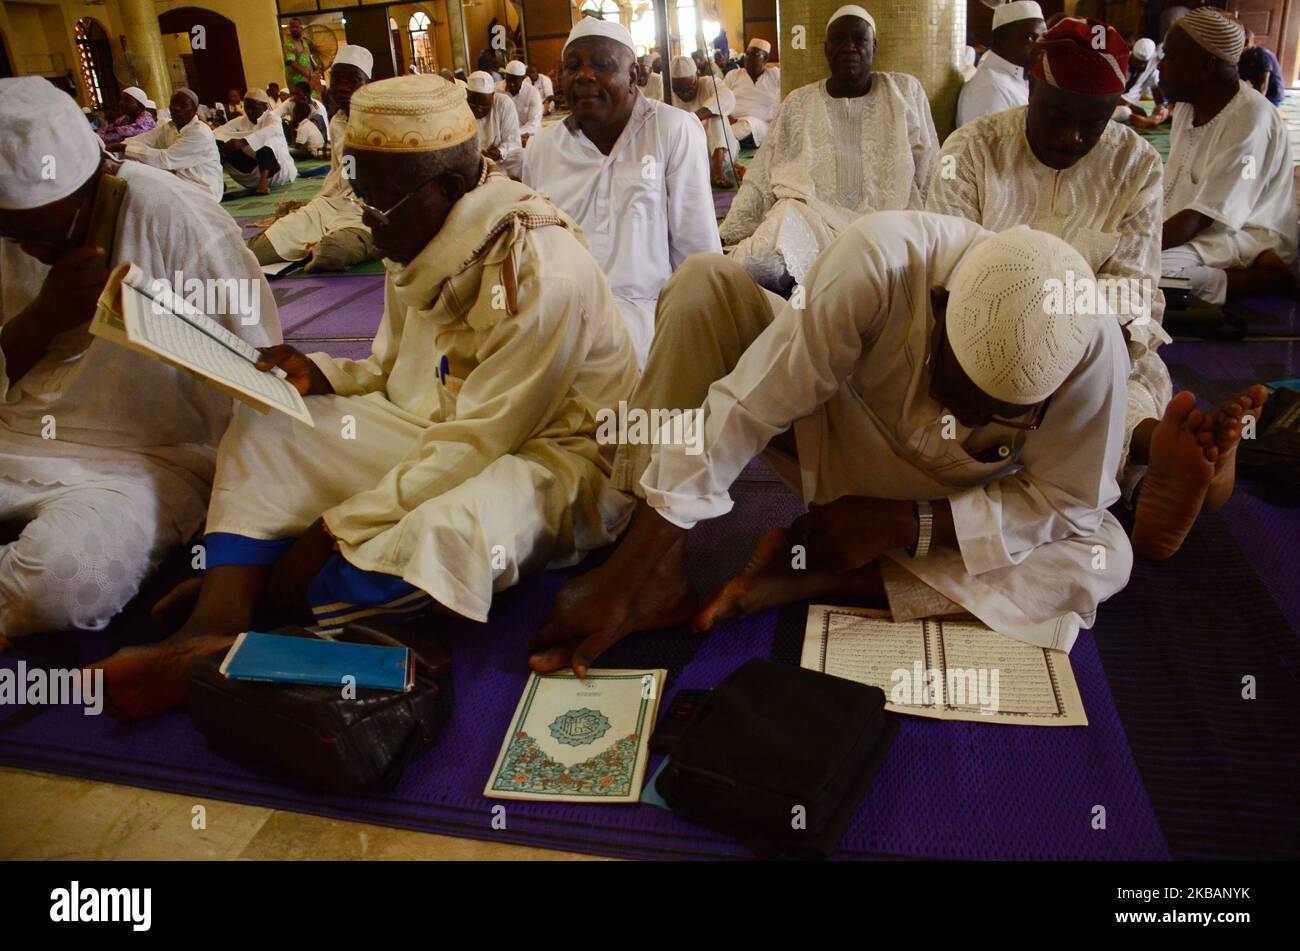 Worshipers at the Lagos State Secretariat Central Mosque shrine in Lagos, in celebrating el Maulud on 10 November 2019. Eid el Maulud is the birthday of the Holy Prophet Muhammad, the day ia marked every 12th of Rabi'ul Awwal of the Islamic calendar. The teaching of Islam is centered on belief in God, devotion and service to humanity. (Photo by Olukayode Jaiyeola/NurPhoto) Stock Photo